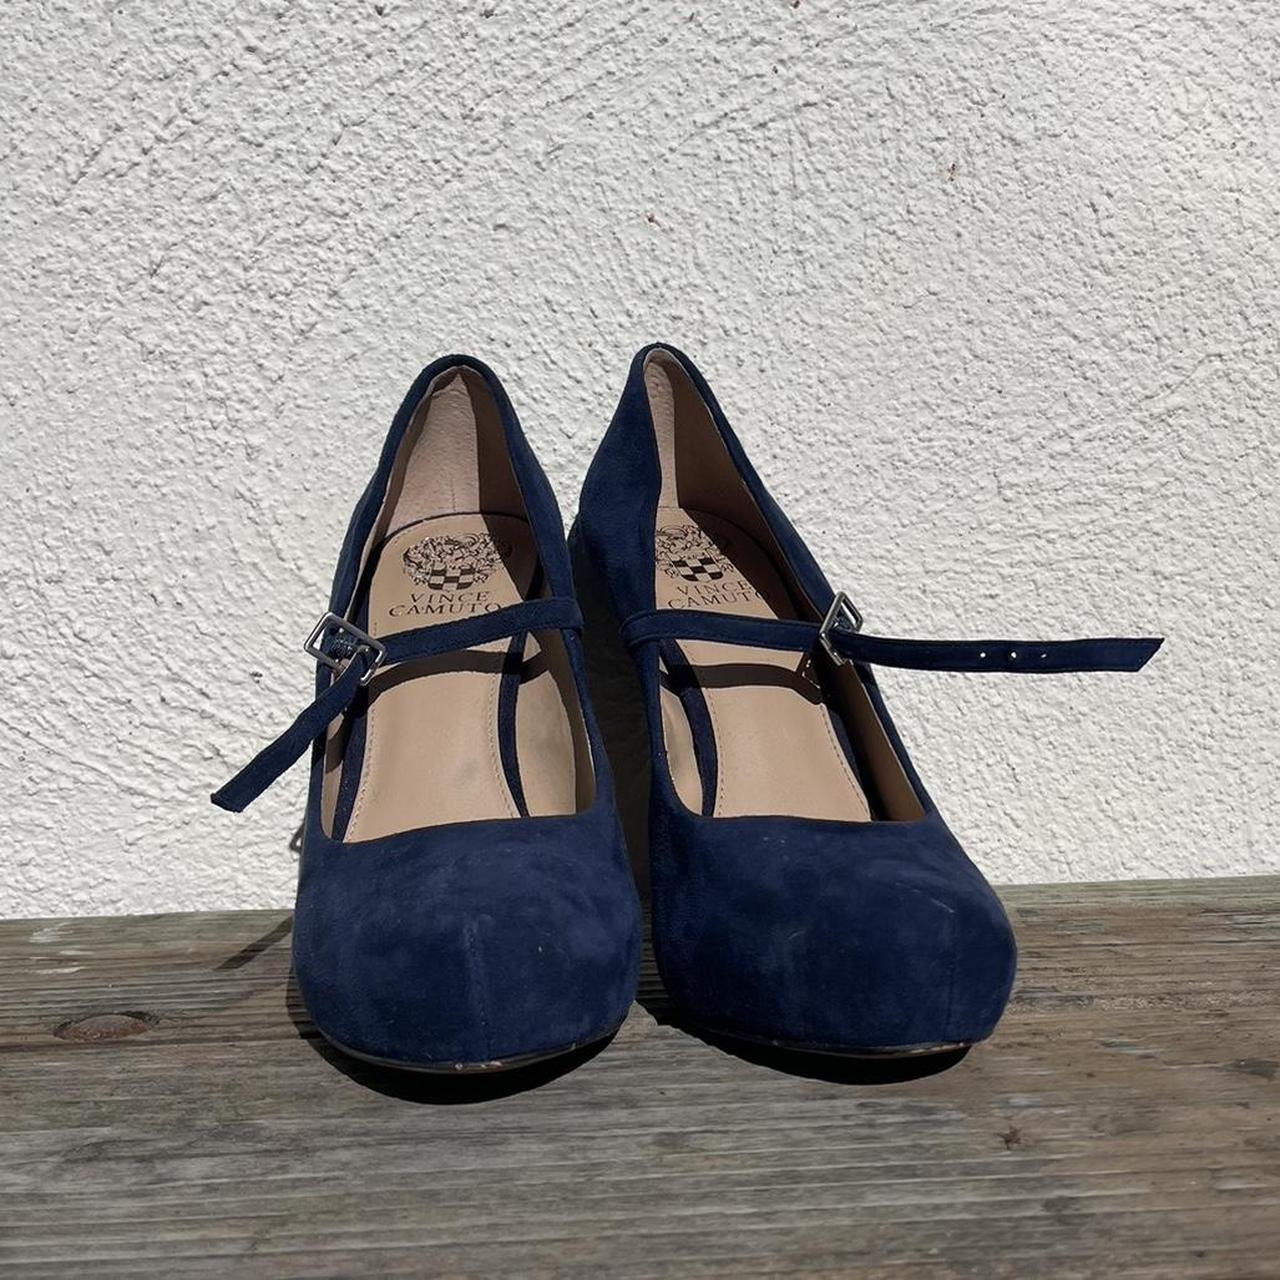 Vince Camuto Women's Navy Courts (3)